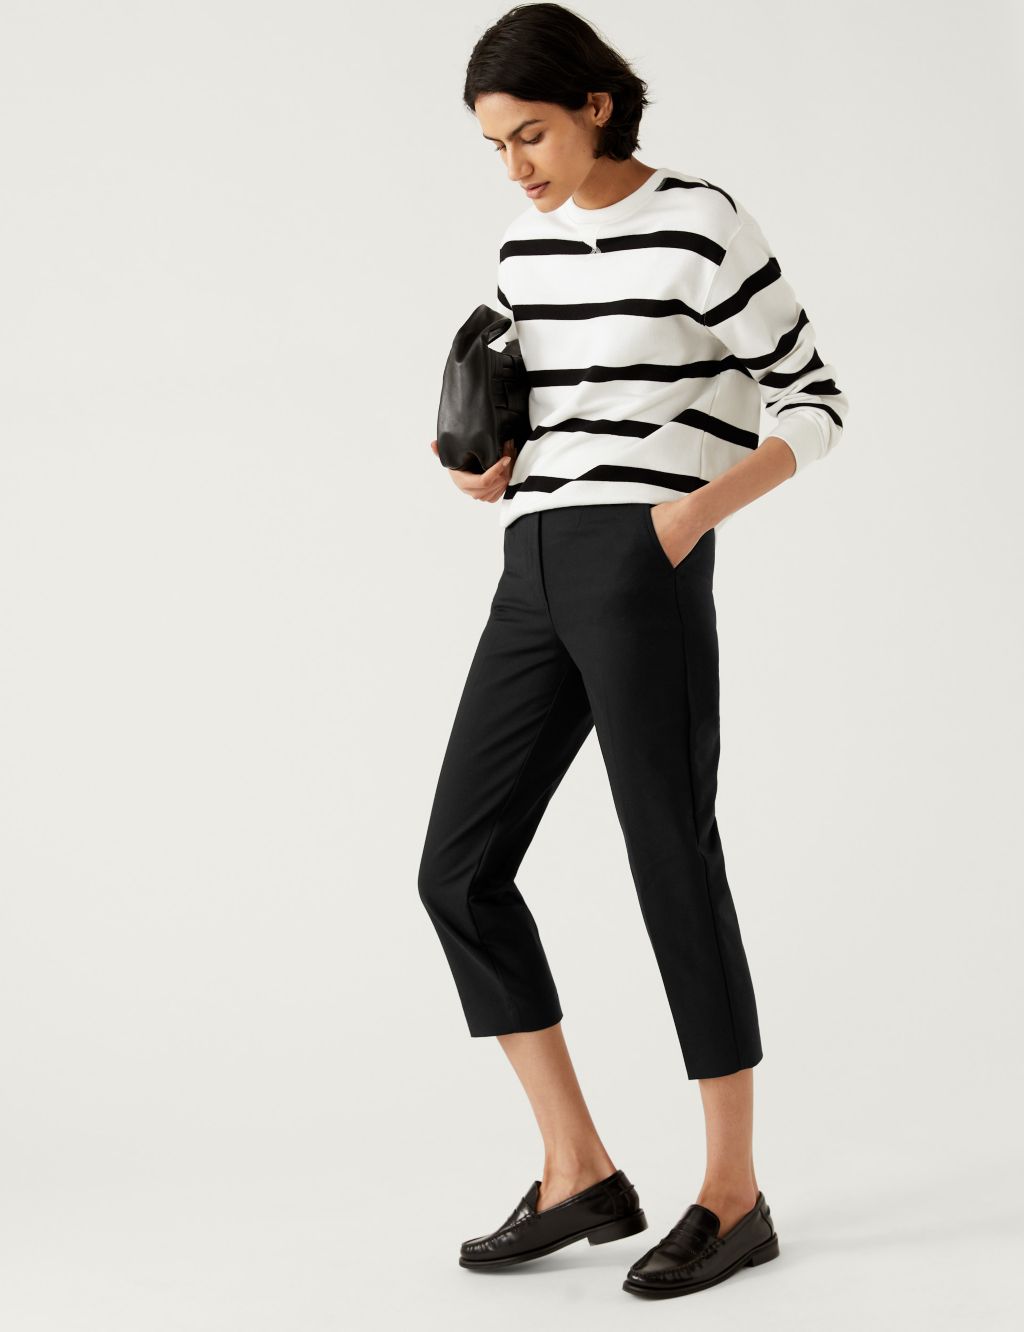 Cotton Blend Slim Fit Cropped Trousers image 2